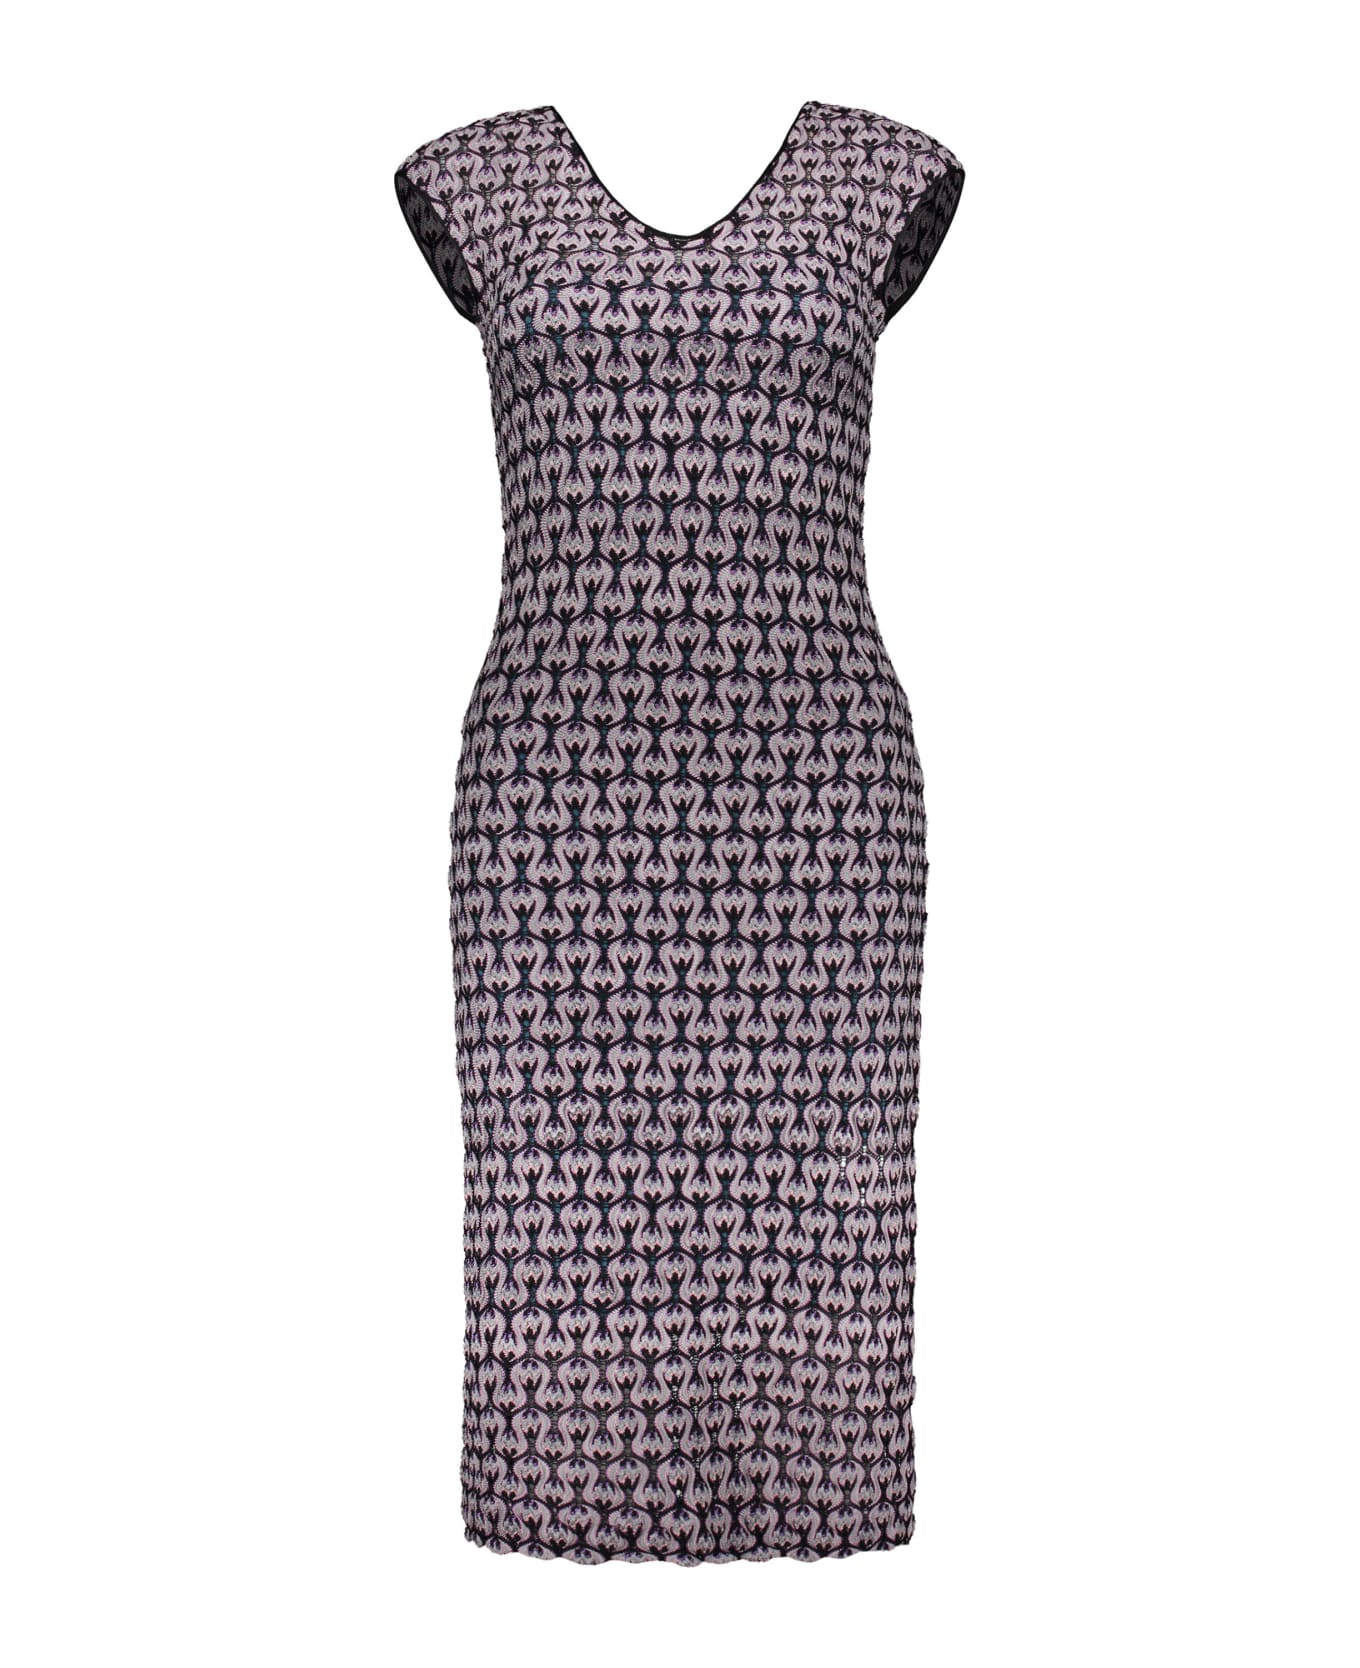 Missoni Knitted Dress - Multicolor